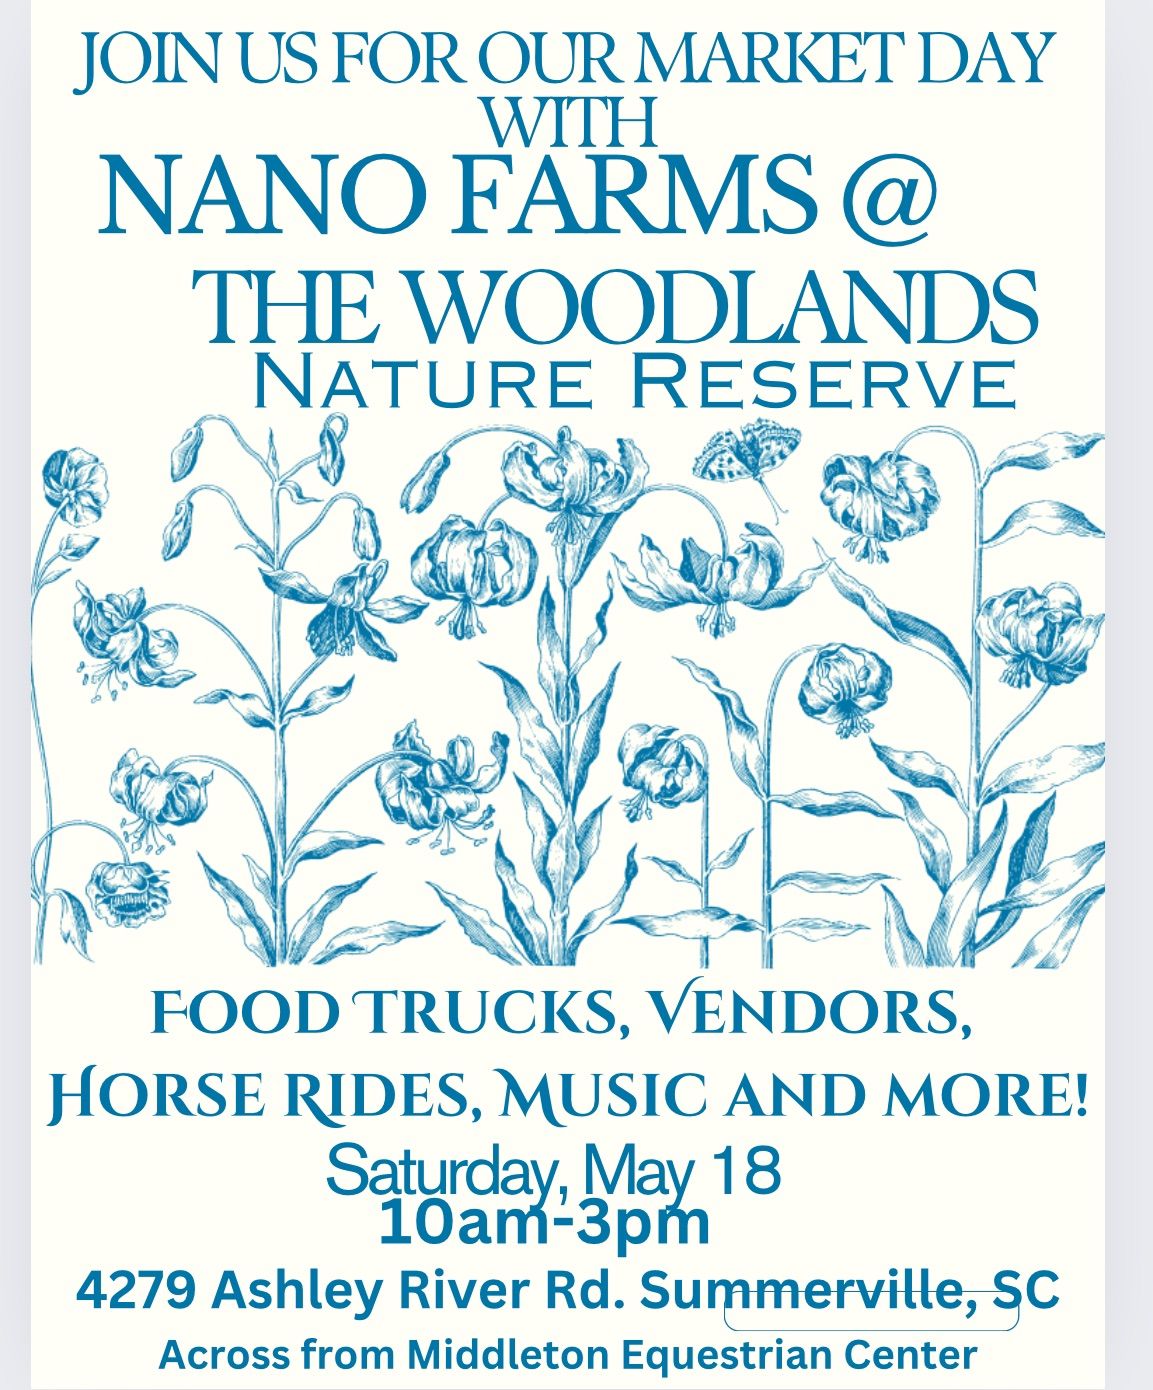 Market Day with Nano Farms at The Woodlands Nature Reserve